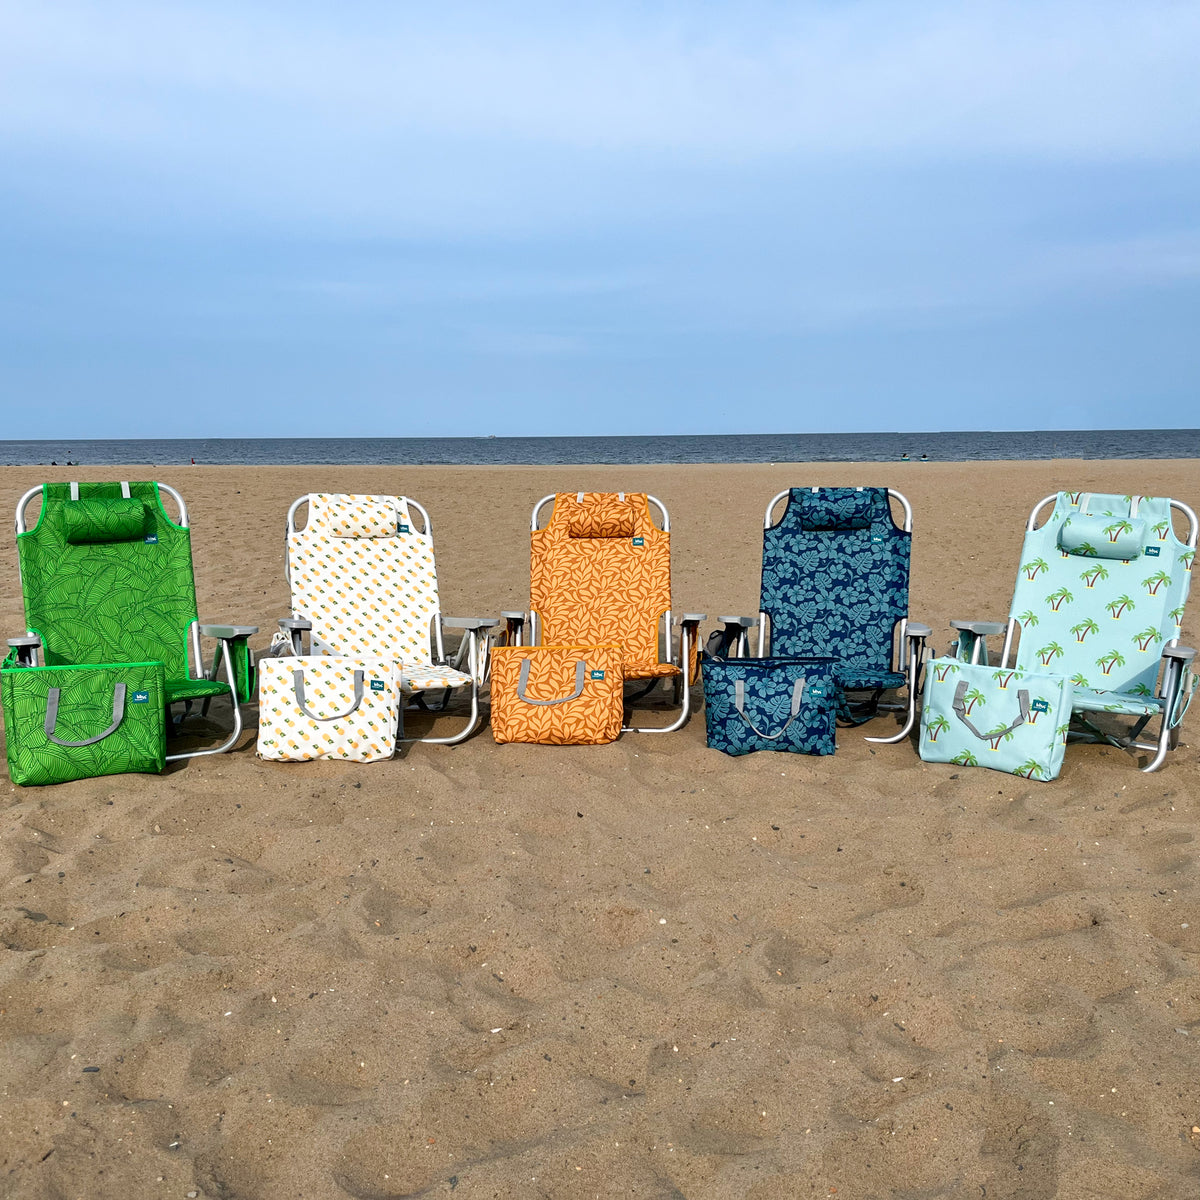 5 Backpack Aluminum Beach Chairs with different colors and patterns in a line on a beach with their matching cooler bags.